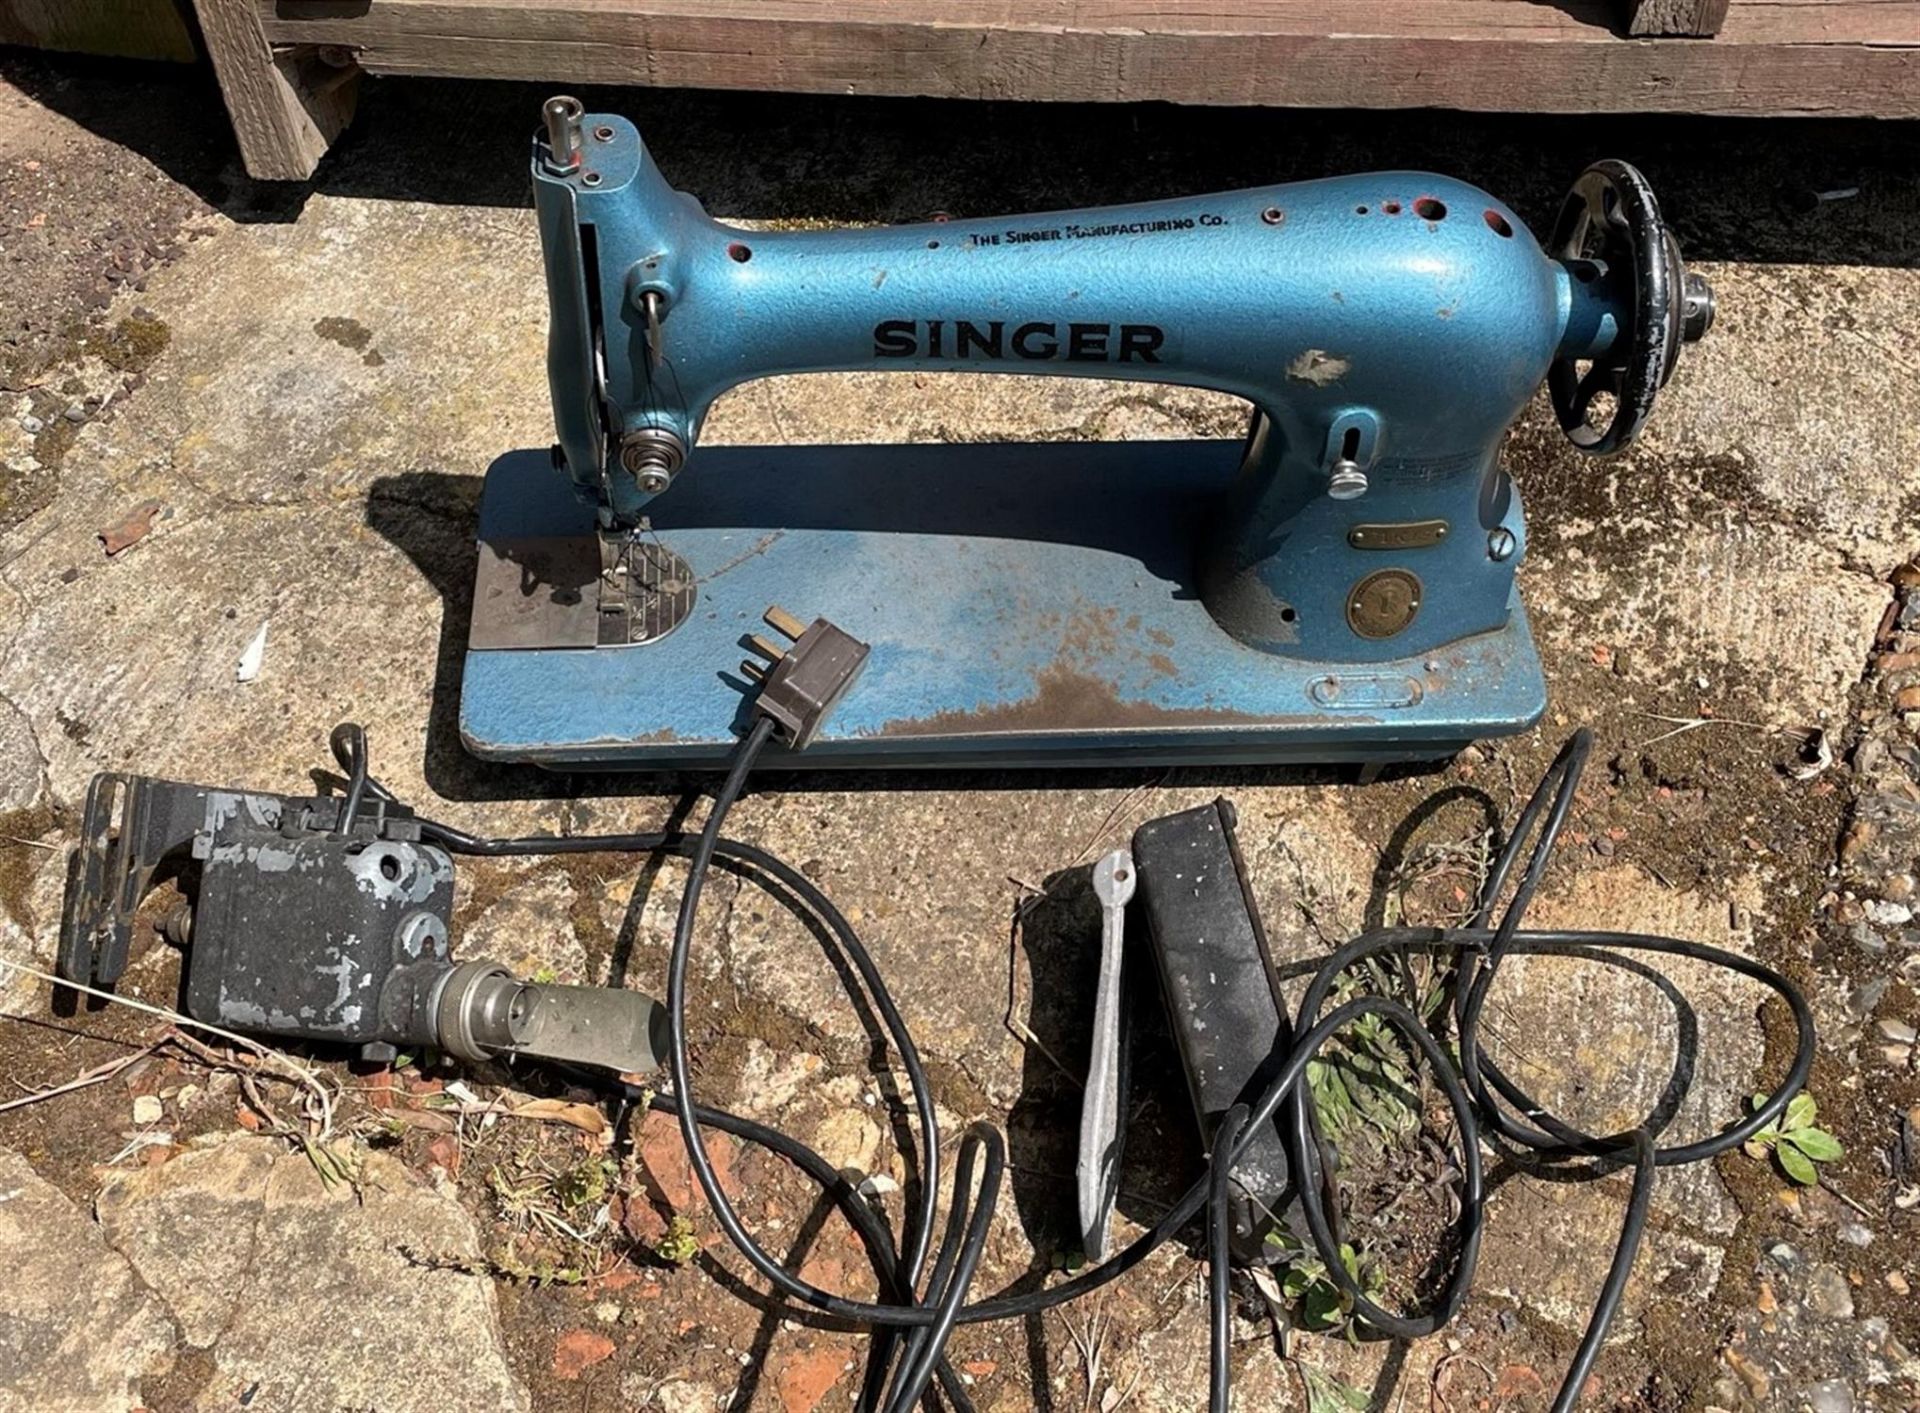 Singer Industrial Sewing Machine with Pedal - Image 4 of 6